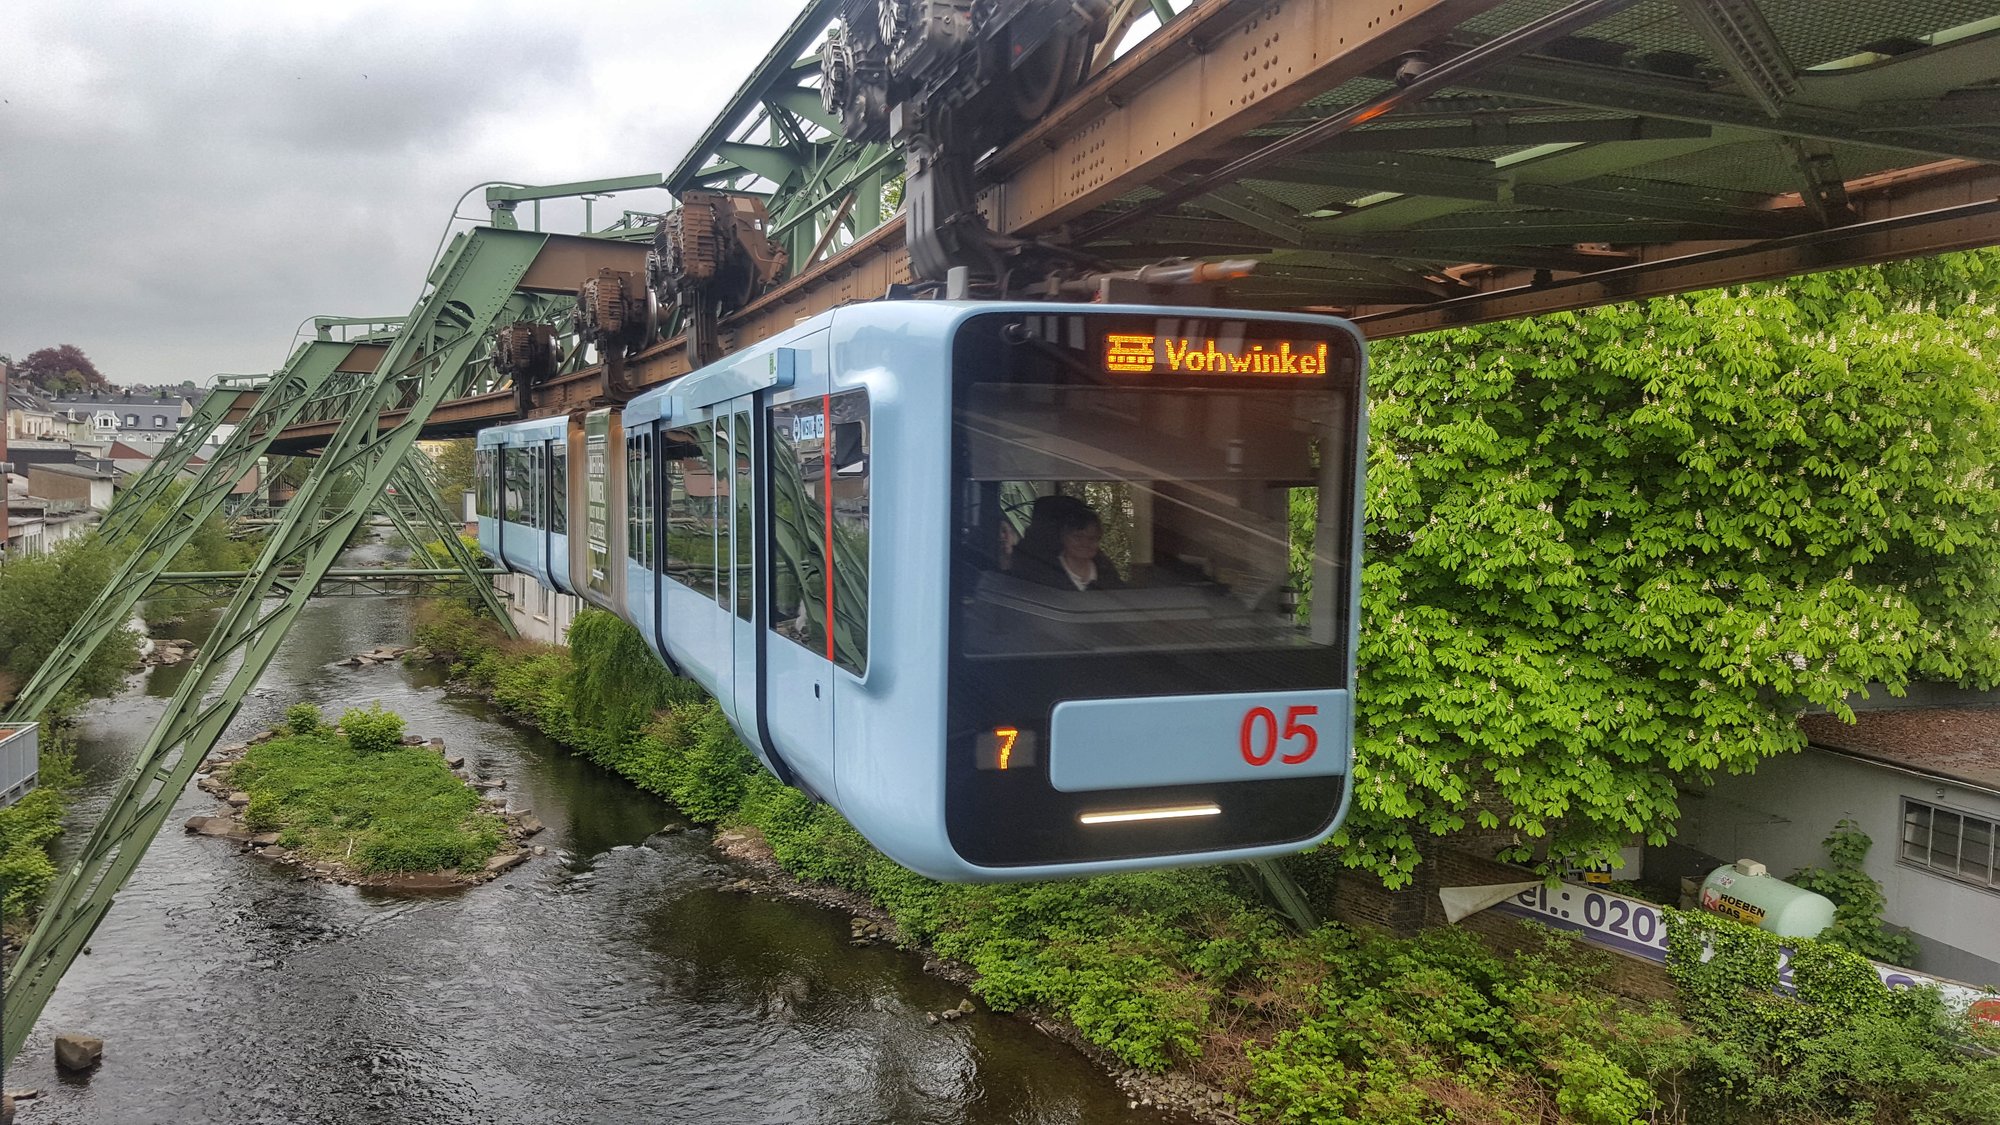 Wuppertal suspended train